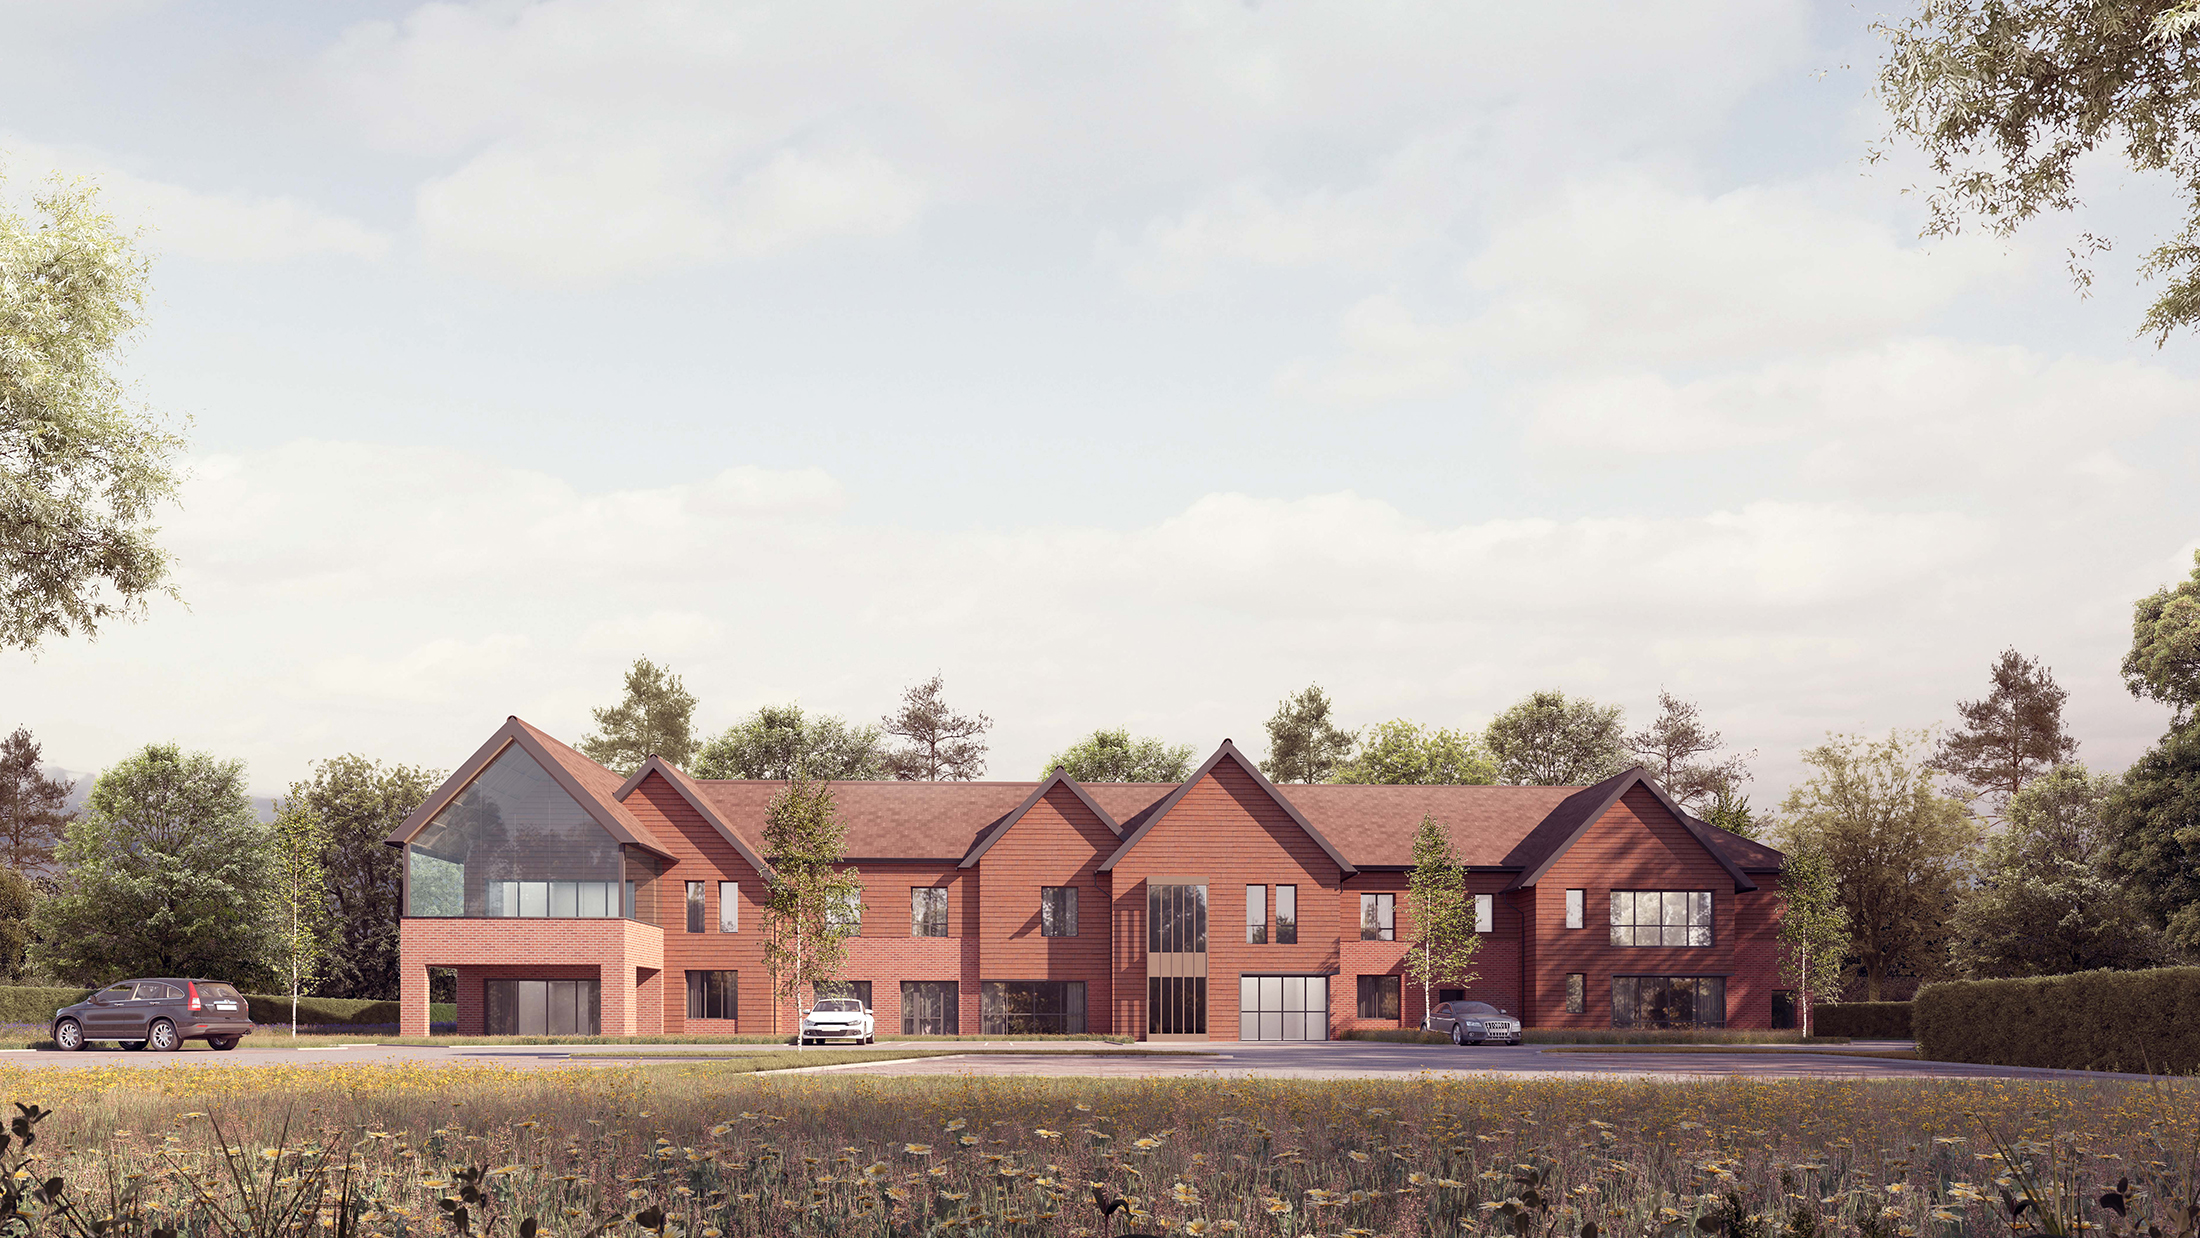 Care Home in Crawley, West Sussex - CGI Front View